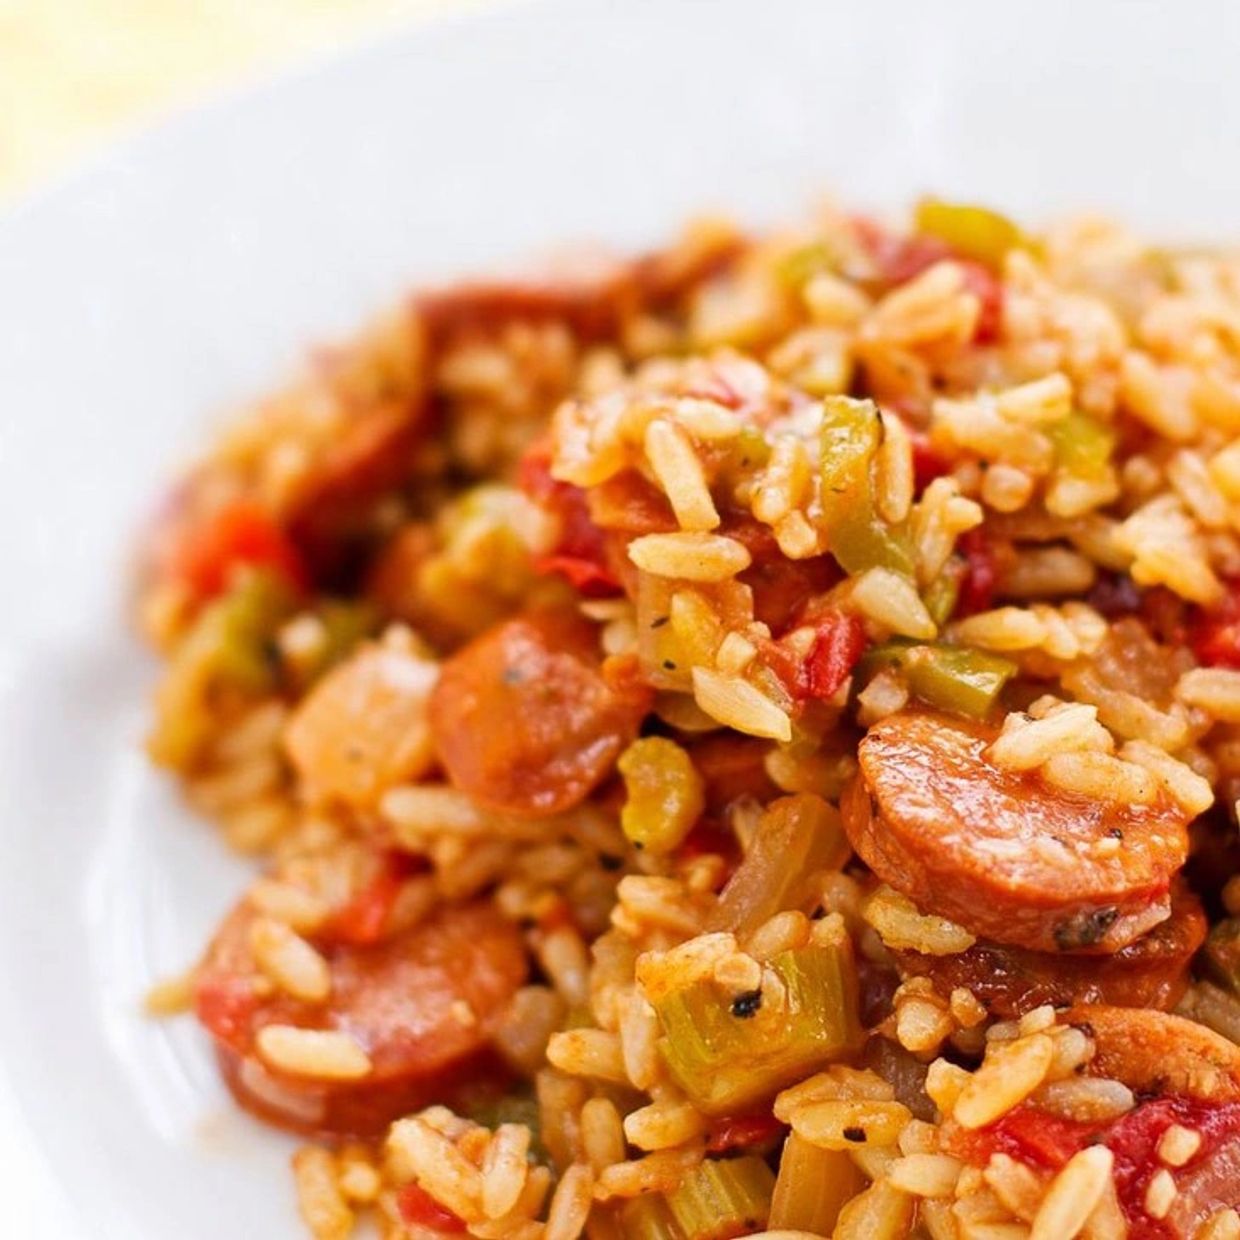 Now you can make great chicken and sausage jambalaya with A Touch Of Luck's spice packs.